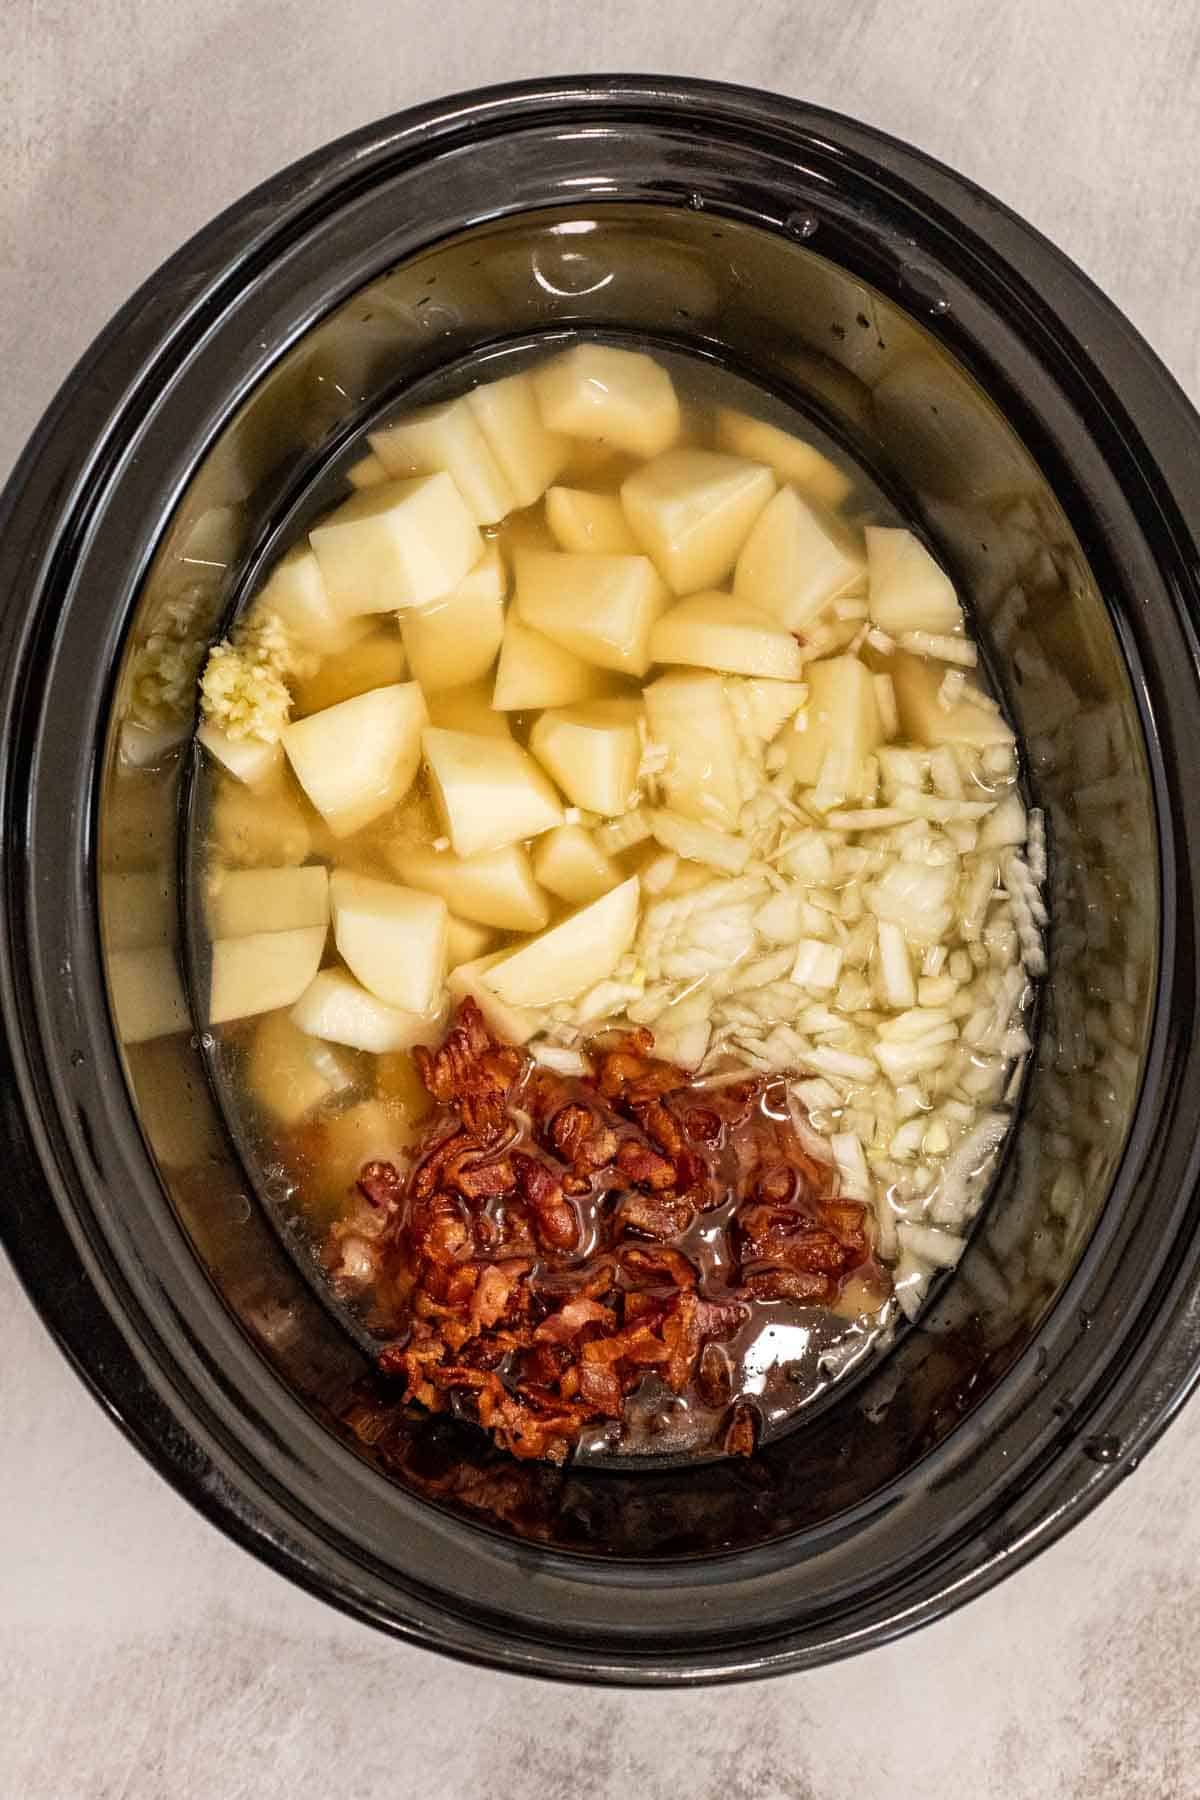 A crockpot containing all the ingredients for crockpot potato soup.